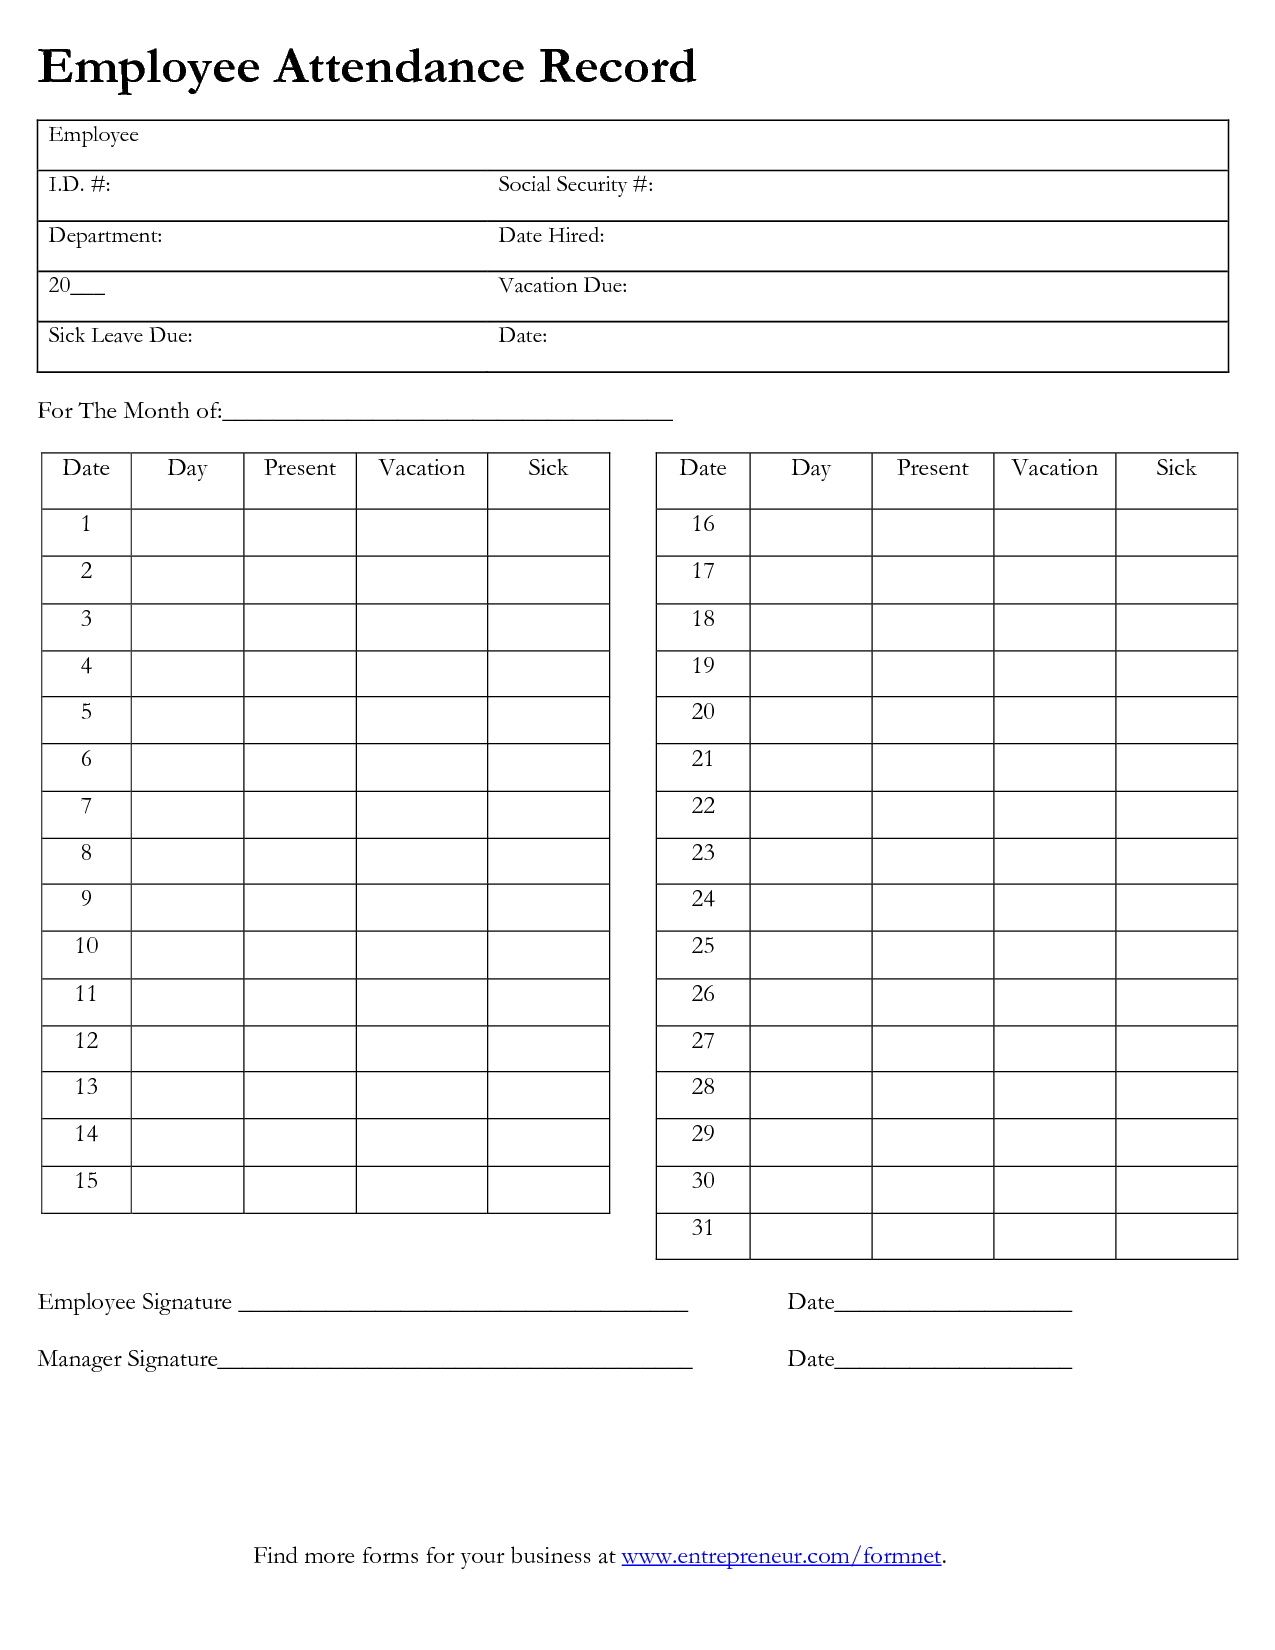 Employee Attendance Record Template & Complete Guide Example